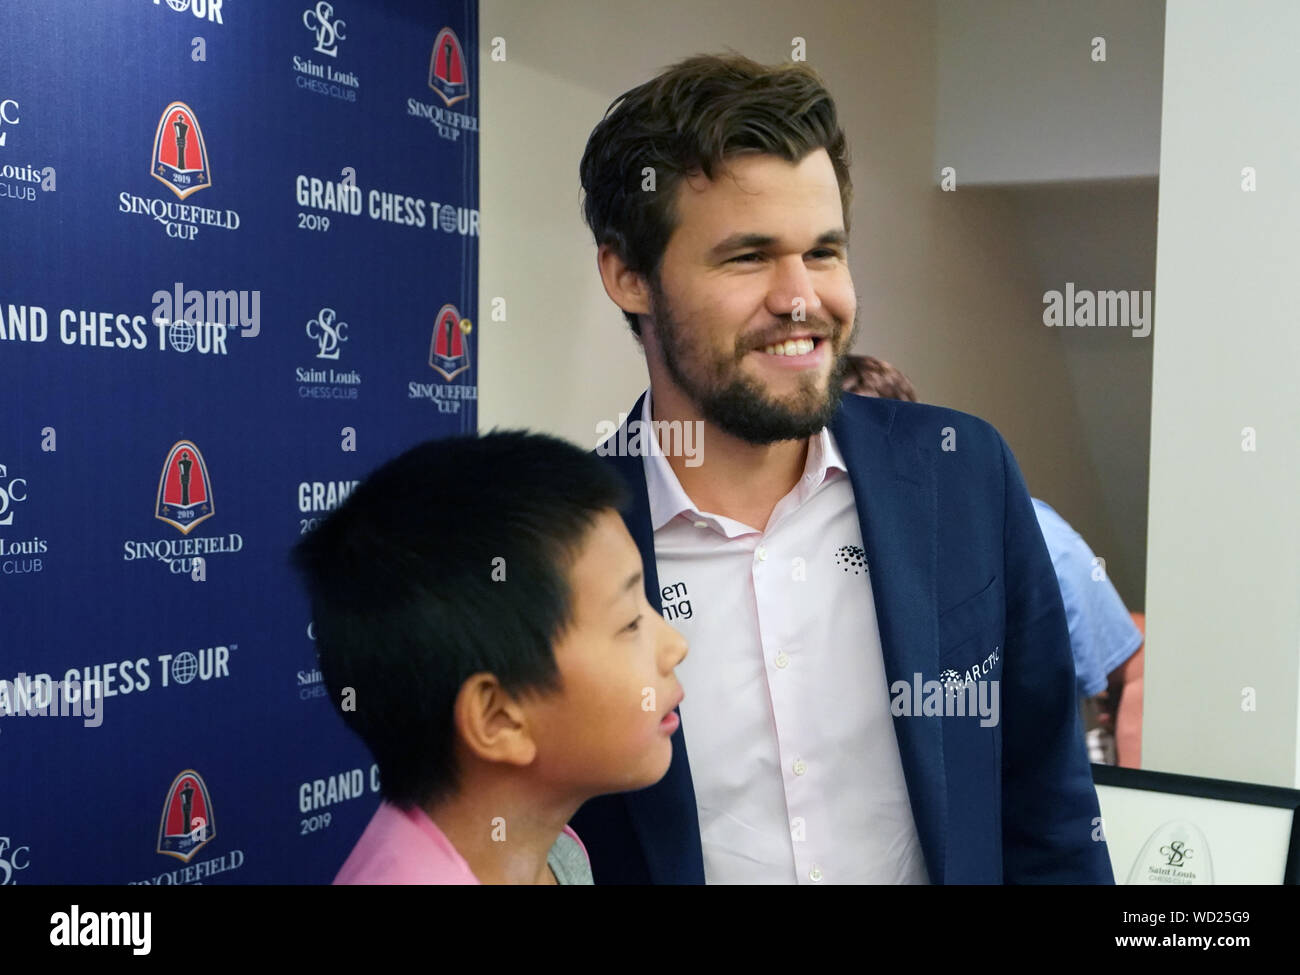 St. Louis, United States. 28th Aug, 2019. Chess Grand Master Magnus Carlsen of Norway, greets fans following the final round of play against Grand Master Maxime Vachier-Lagrave of France in the Sinquefield Cup tournament at the Saint Louis Chess Club in St. Louis on Wednesday, August 28, 2019.Carlsen defeated Vachier-Lagrave and will now face Grand Master Ding Liren of China for the championship on 8/29/2019. Photo by Bill Greenblatt/UPI Credit: UPI/Alamy Live News Stock Photo